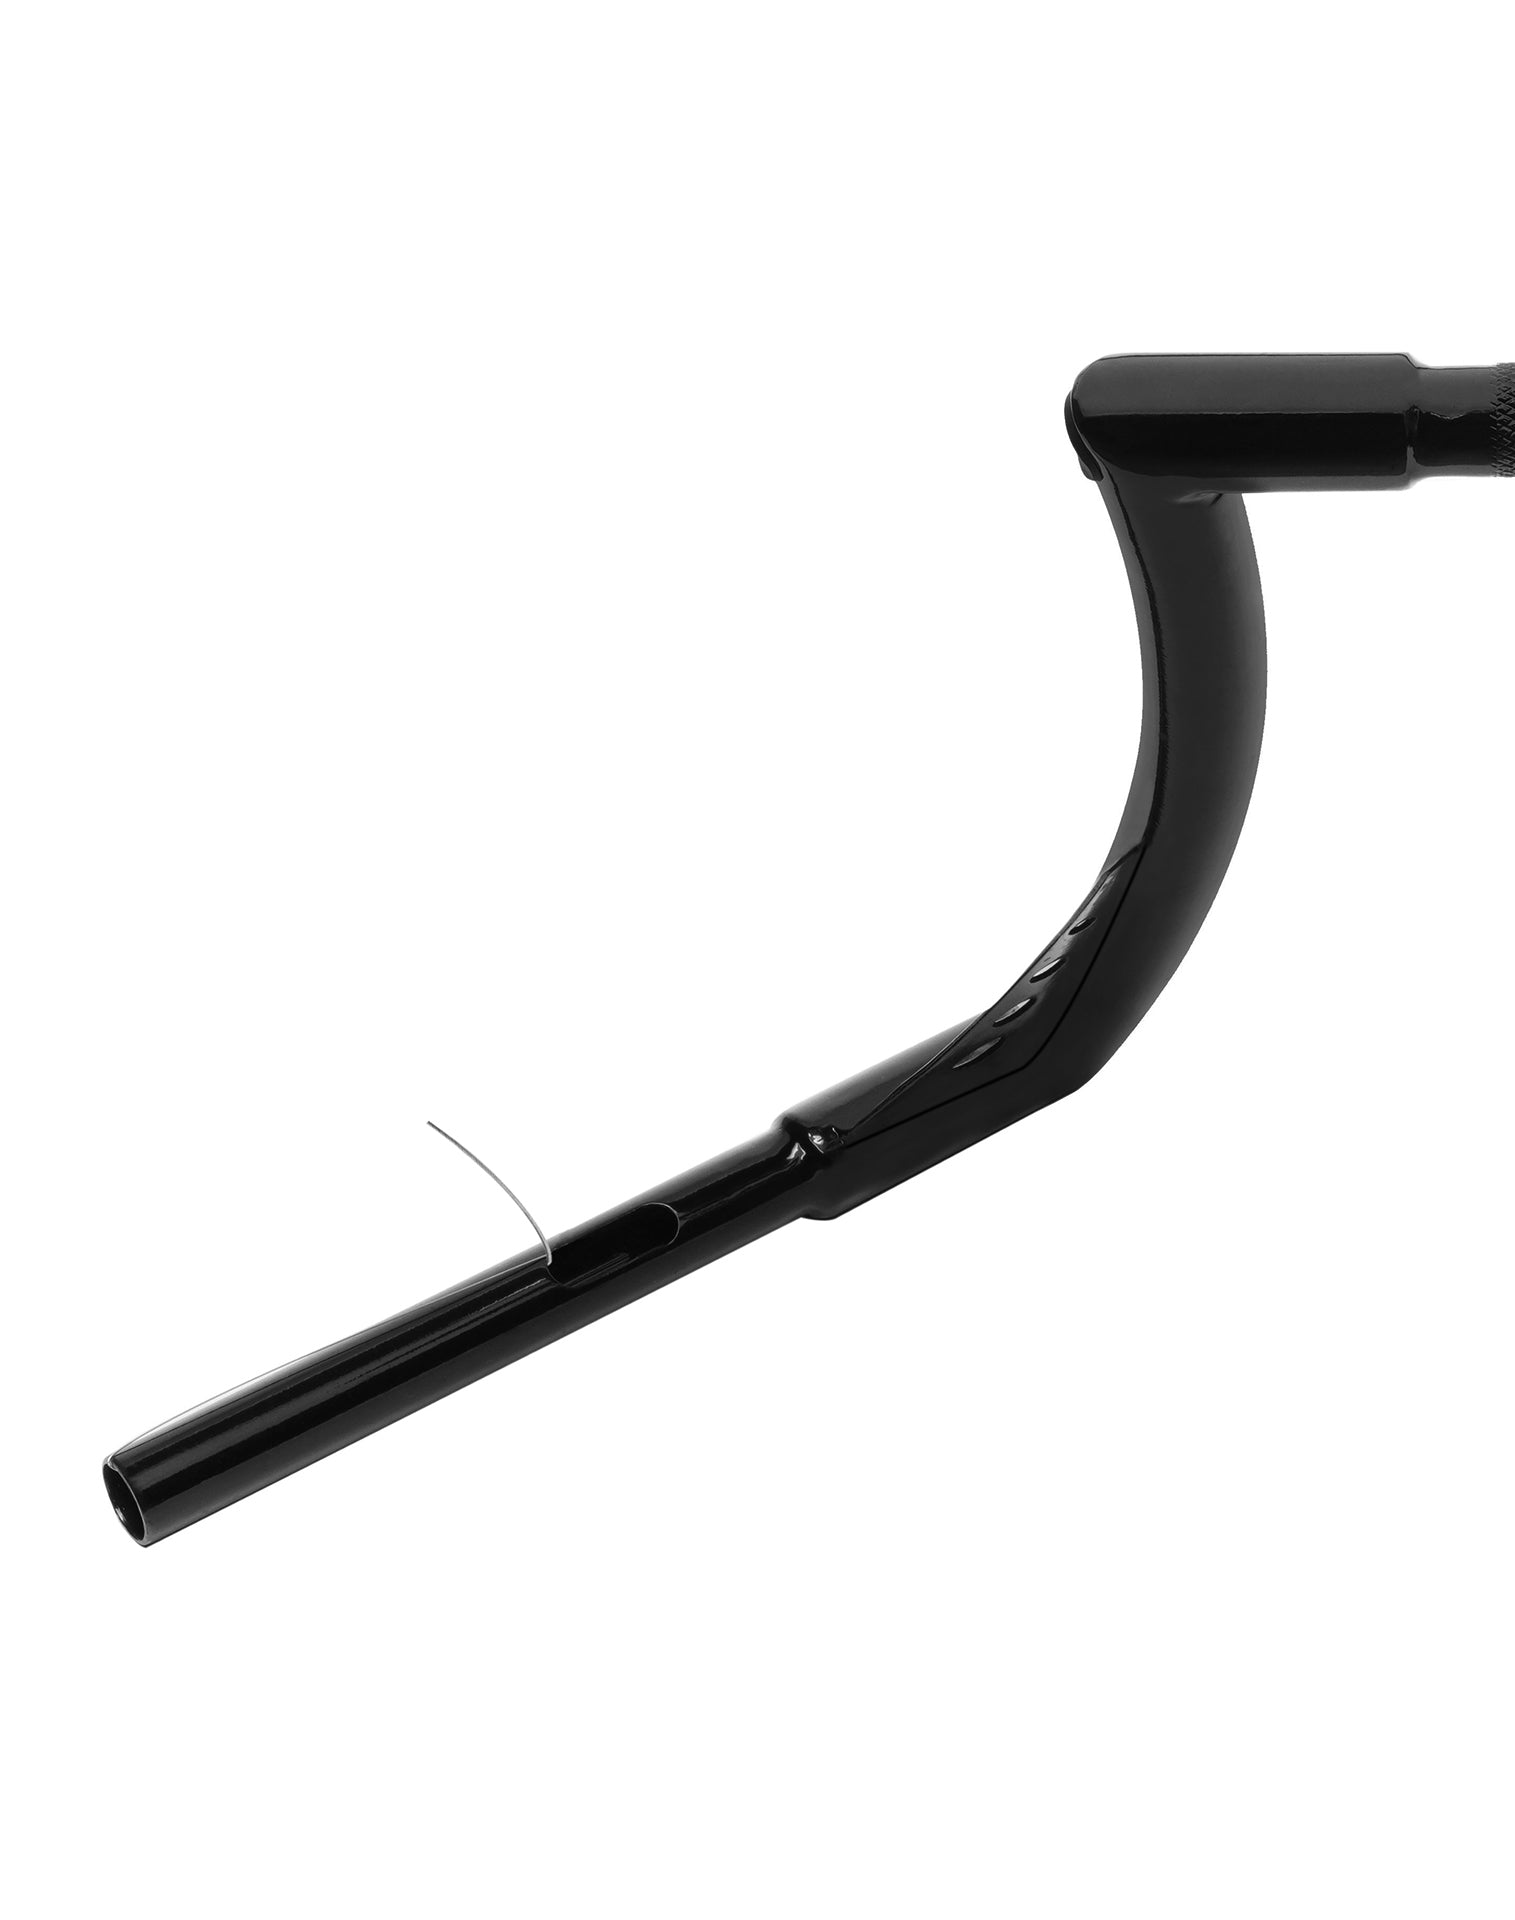 Viking Iron Born 12" Handlebar For Harley Dyna Low Rider FXDL Gloss Black Close Up View